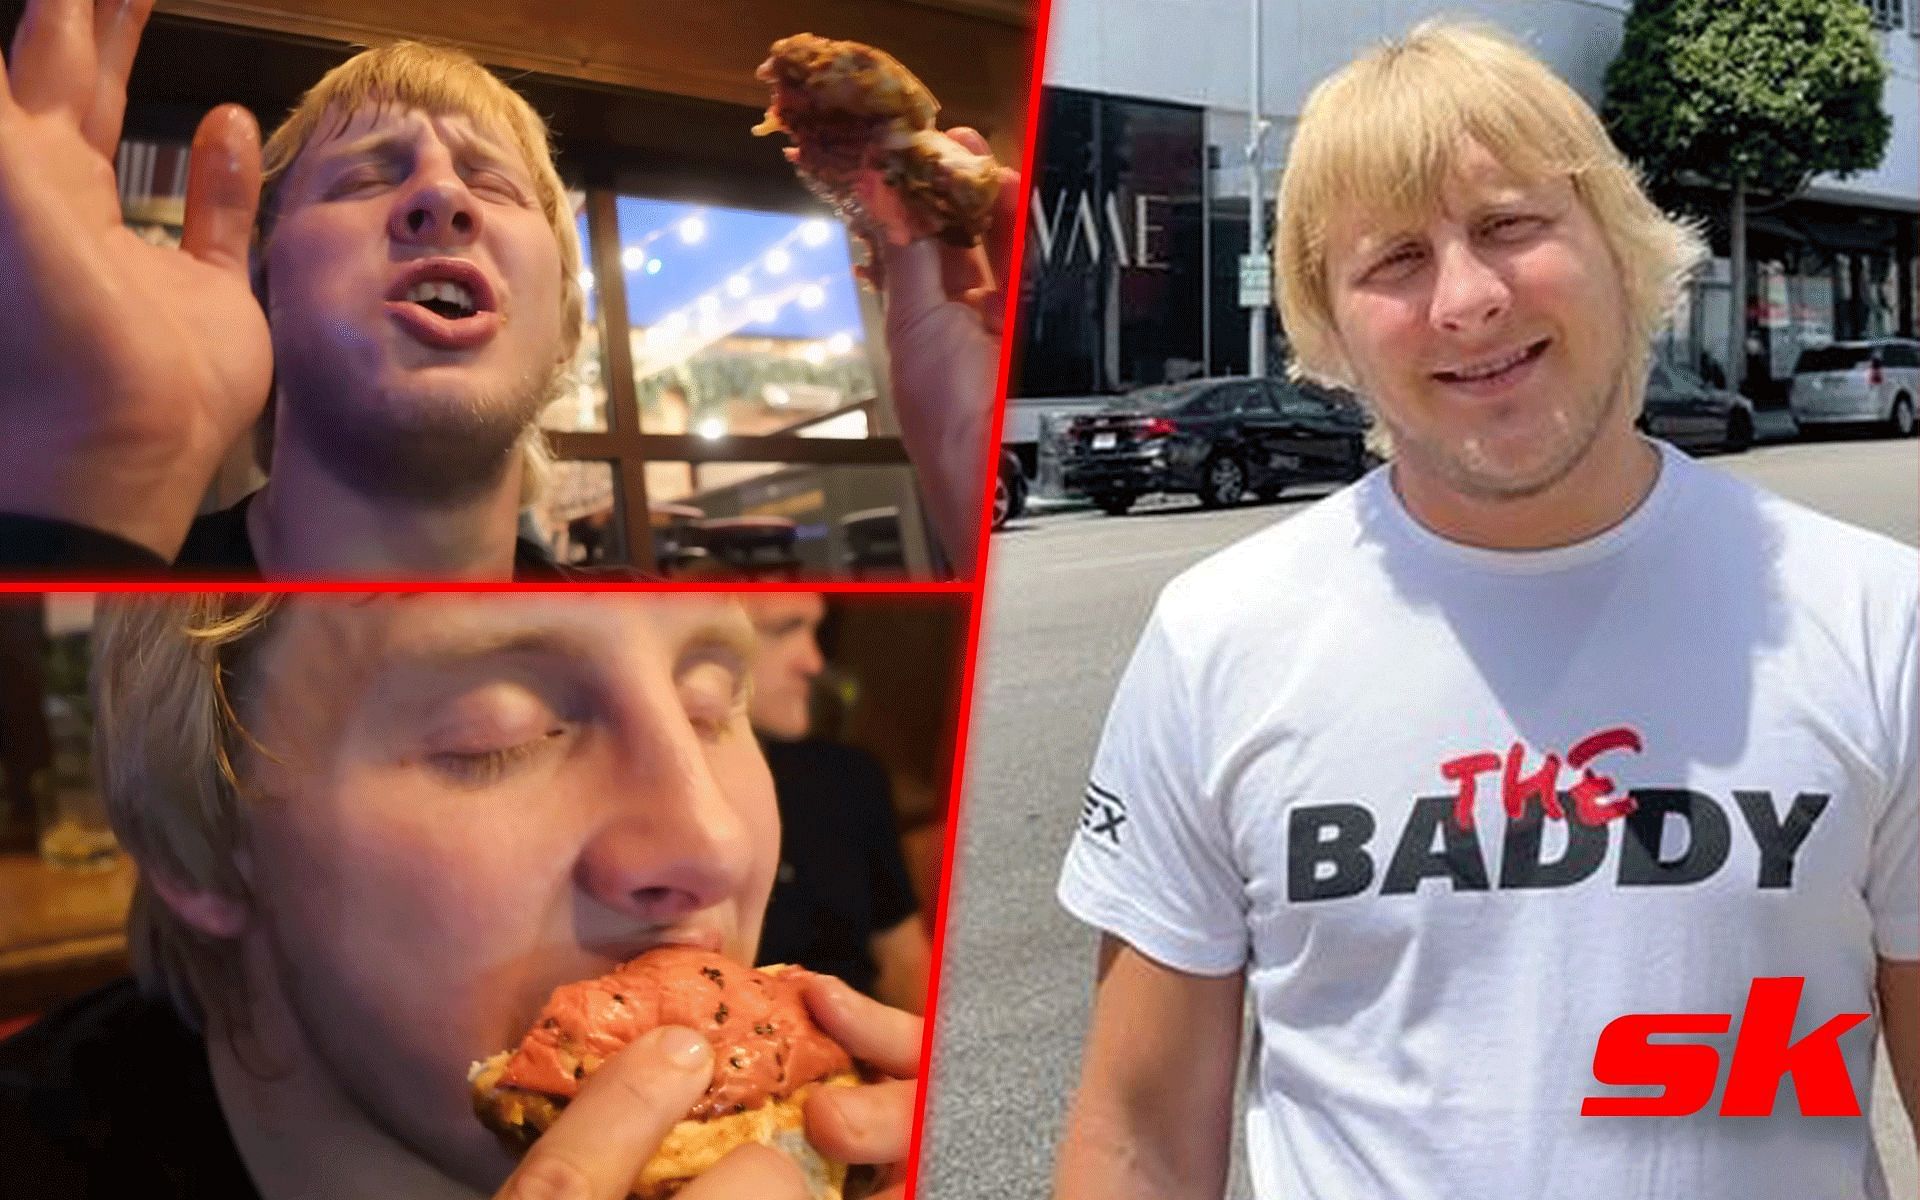 Paddy Pimblett becomes fat in between fights [Image courtesy: Paddy the Baddy on YouTube, @theufcbaddy on Instagram]